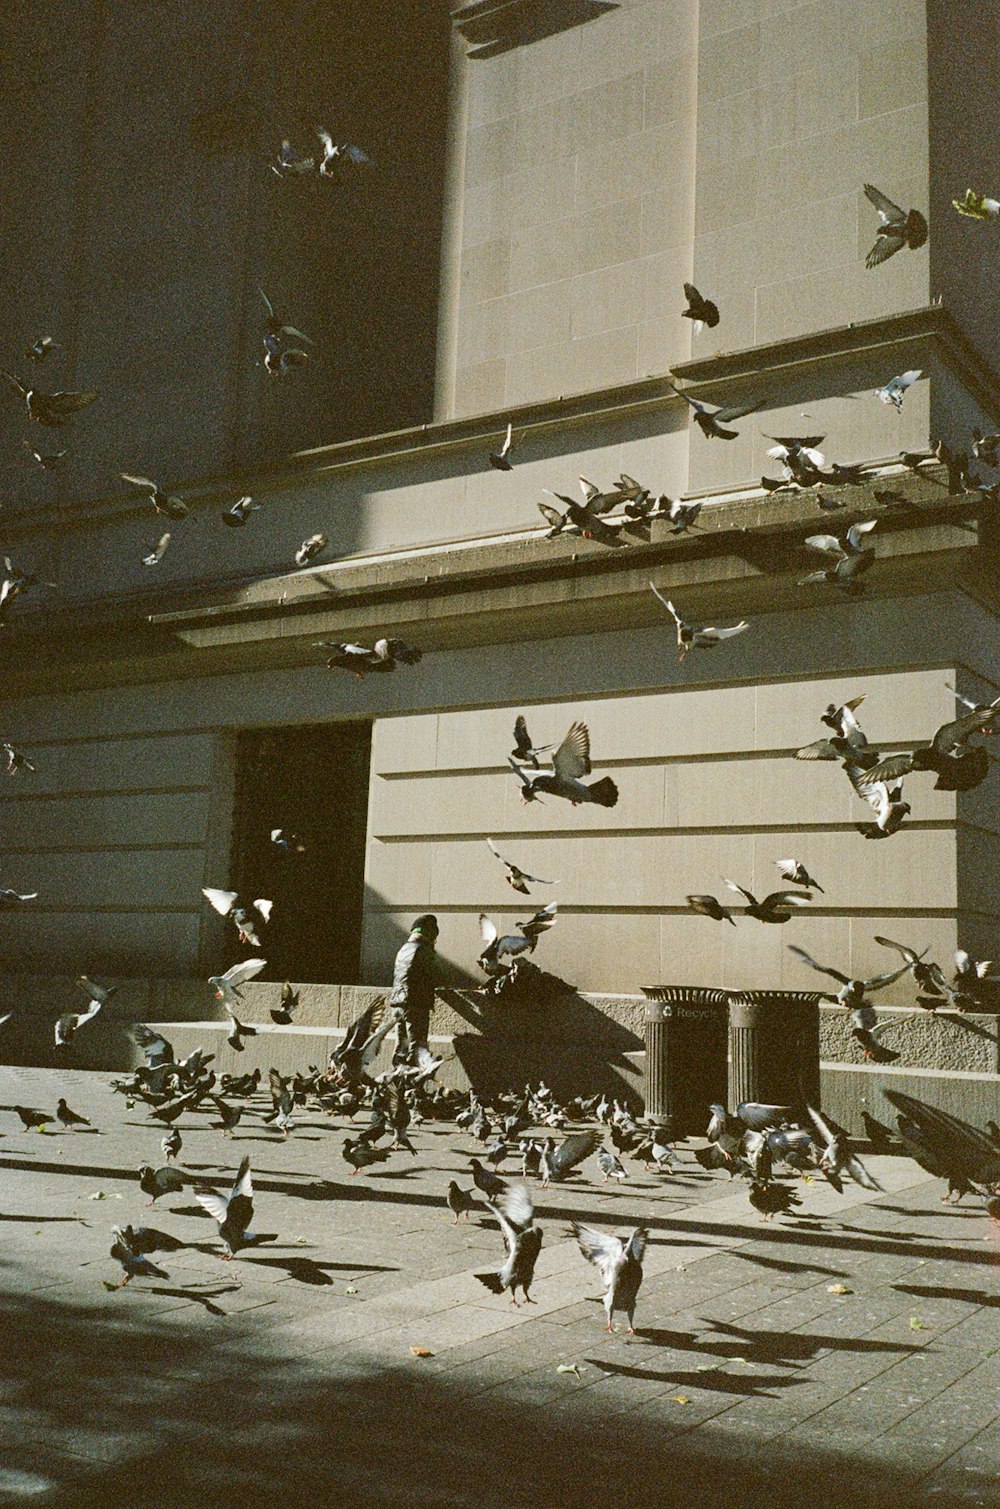 a flock of birds flying over a building